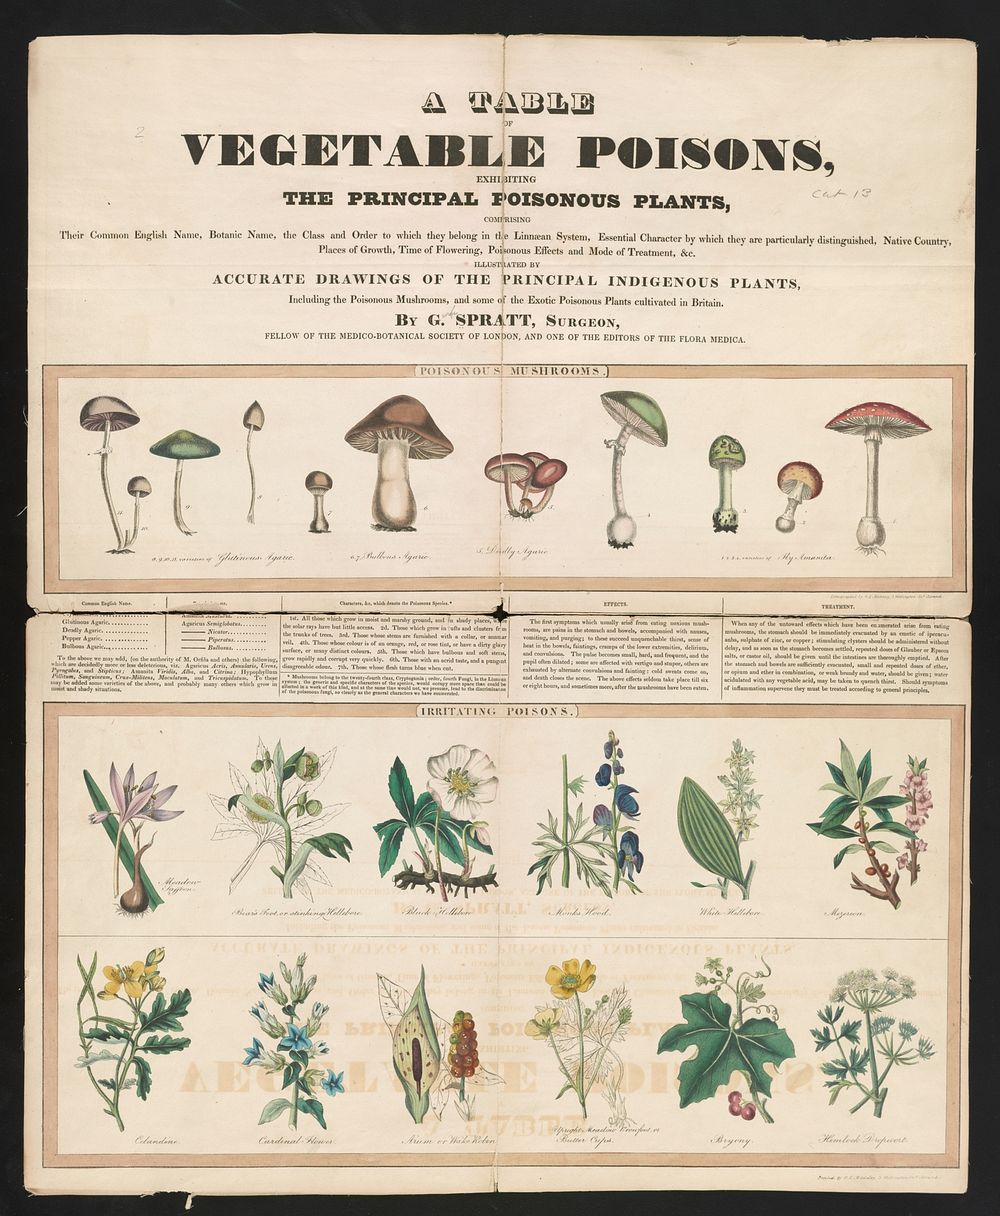 Poisonous mushrooms: Irritating poisons (1840&ndash;1850) print in high resolution by George Edward Madeley.  